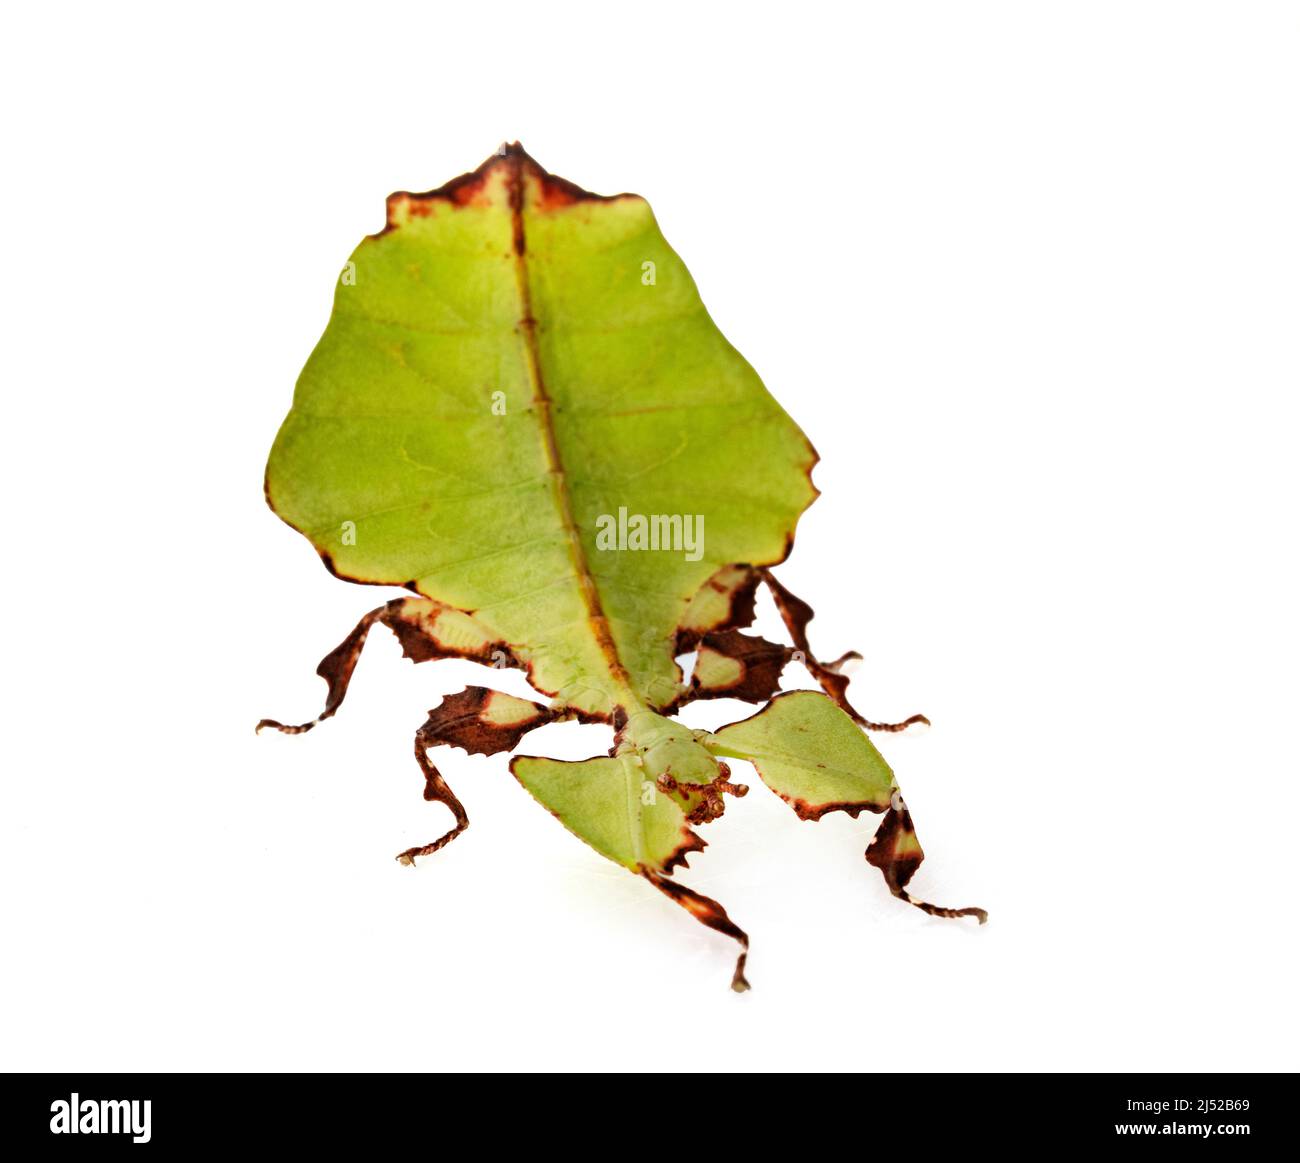 stick insect in front of white background Stock Photo